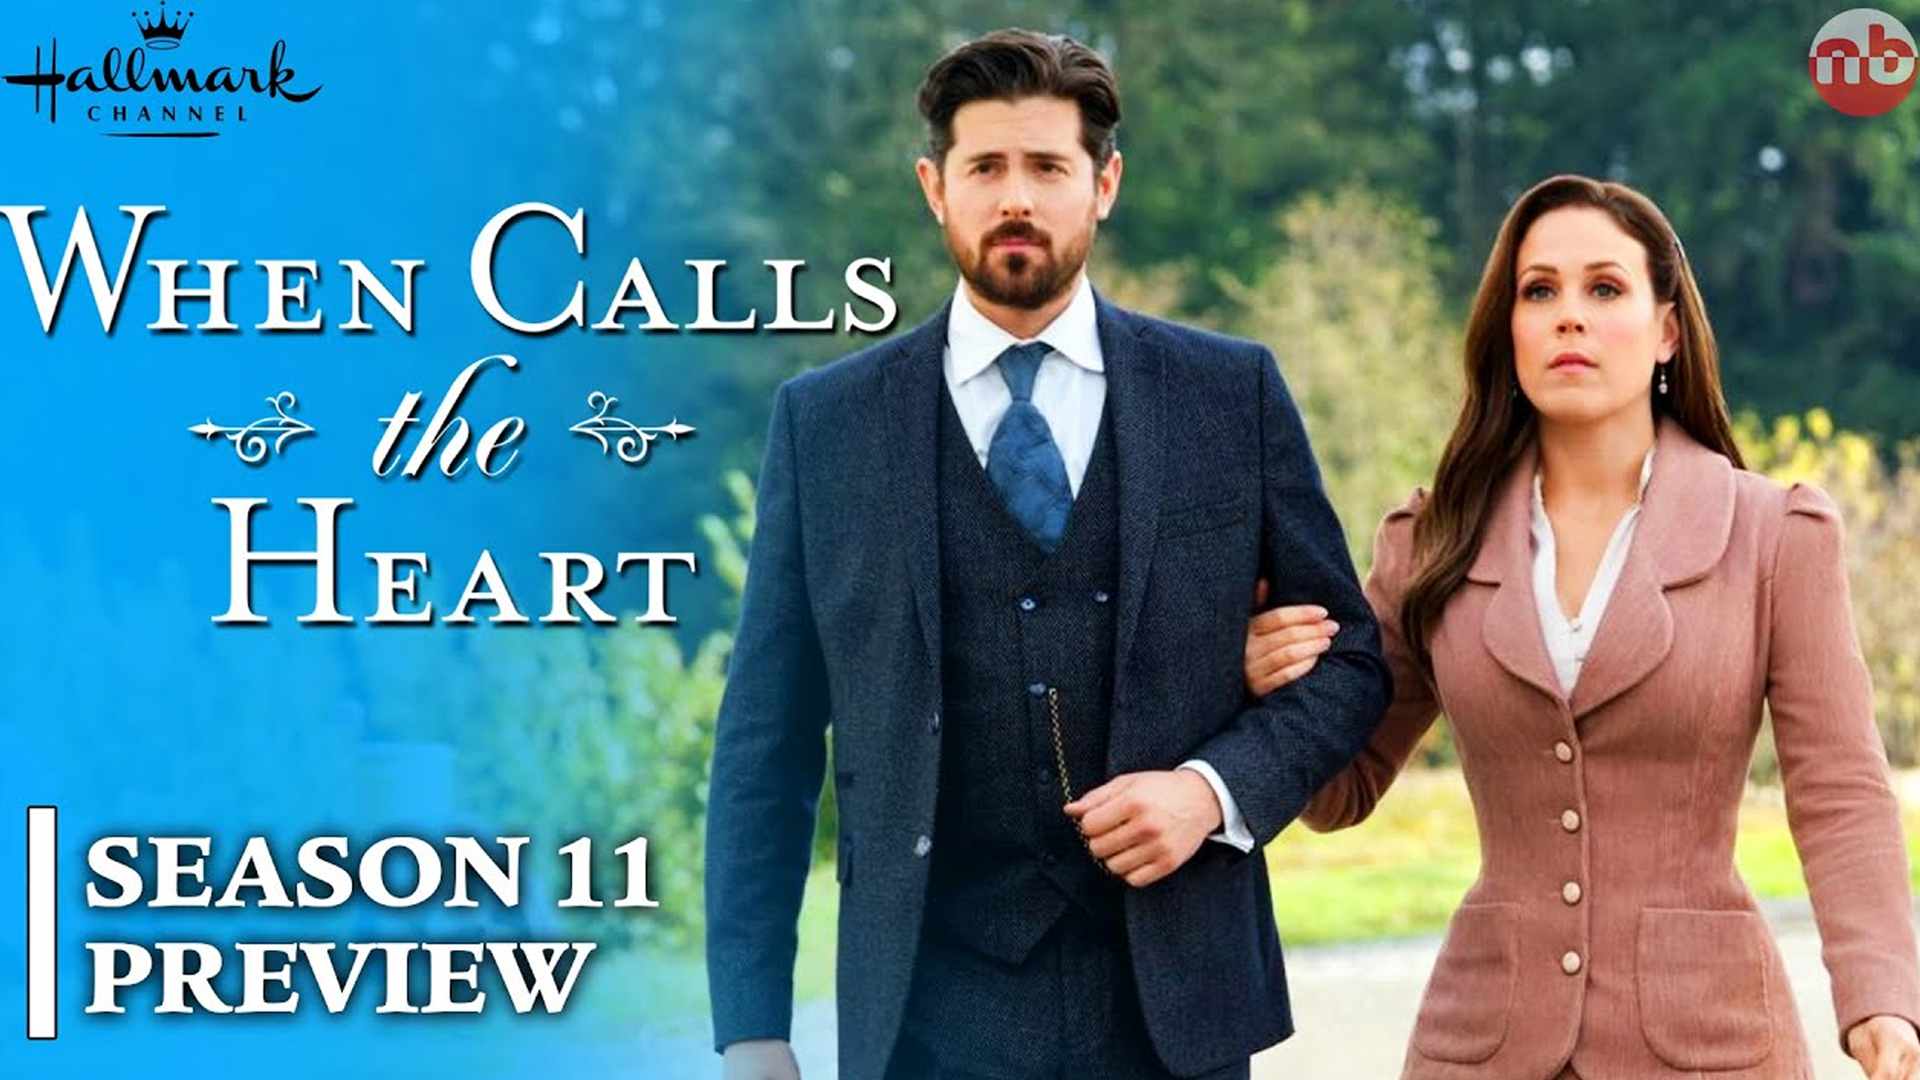 When Is When Calls The Heart Season 11 Coming?